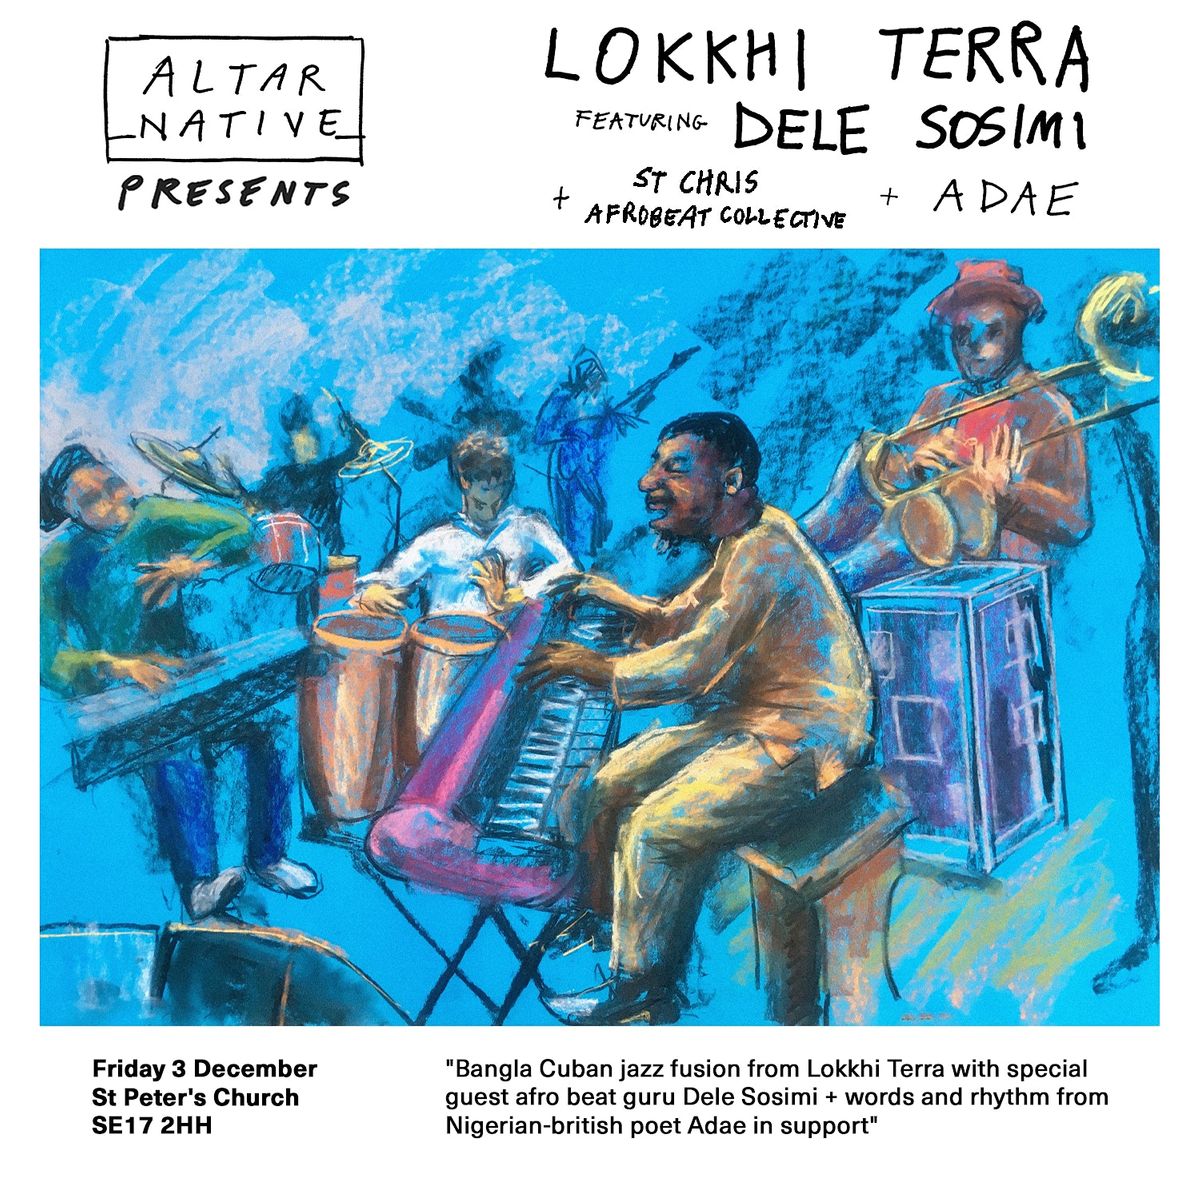 Lokkhi Terra with Dele Sosimi + St Chris Afrobeat Collective + Adae